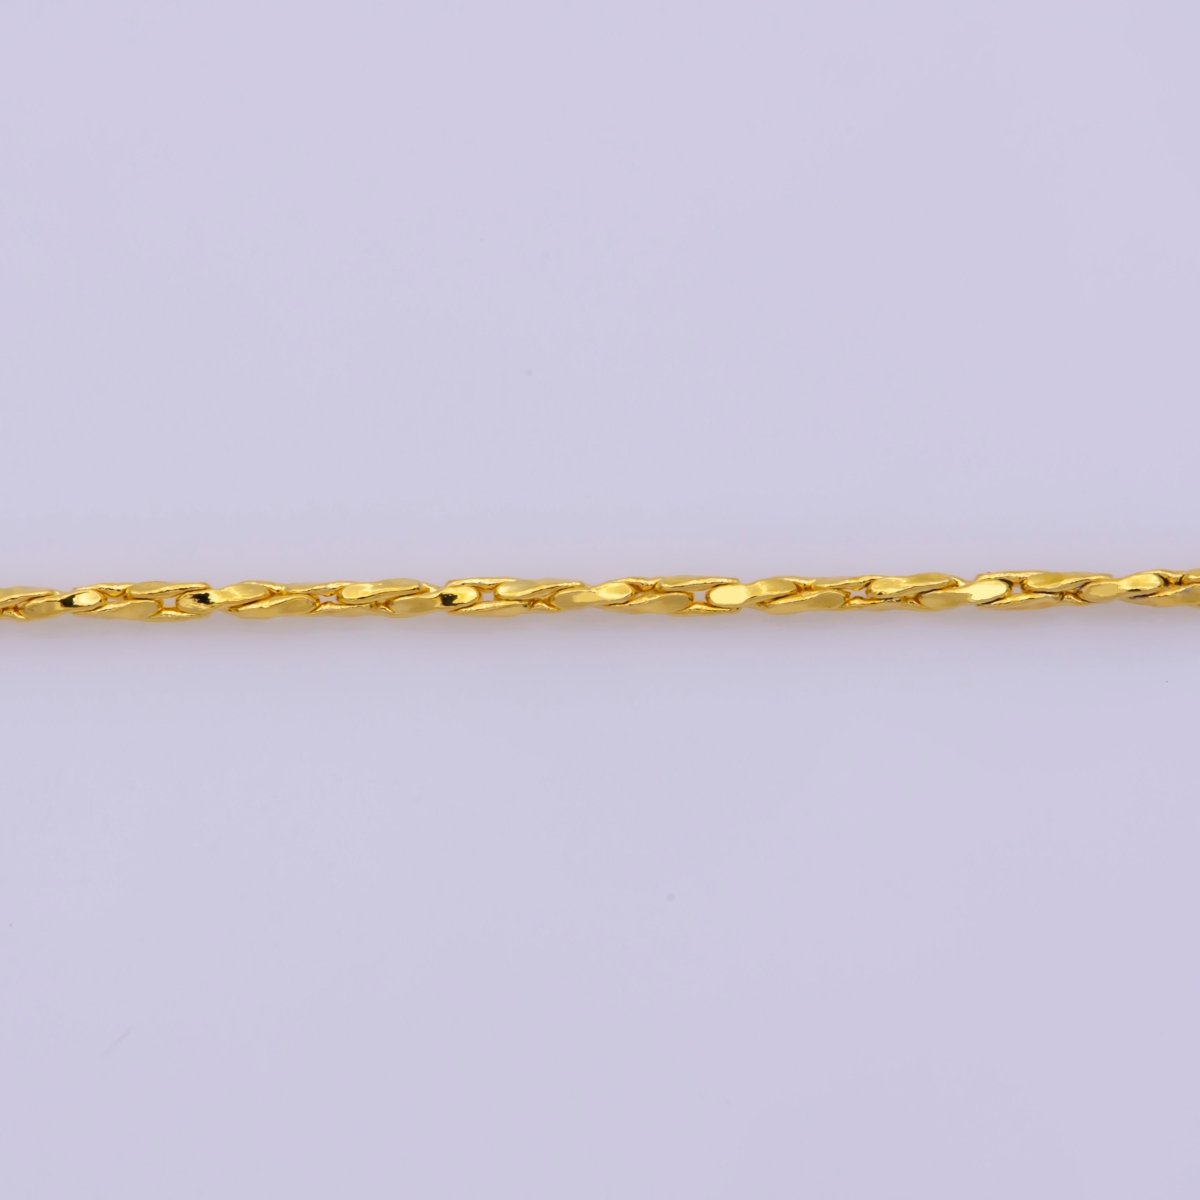 0.8mm Dainty Wheat 18 Inches Layering Chain Necklace w. Spring Ring | WA-396 Clearance Pricing - DLUXCA